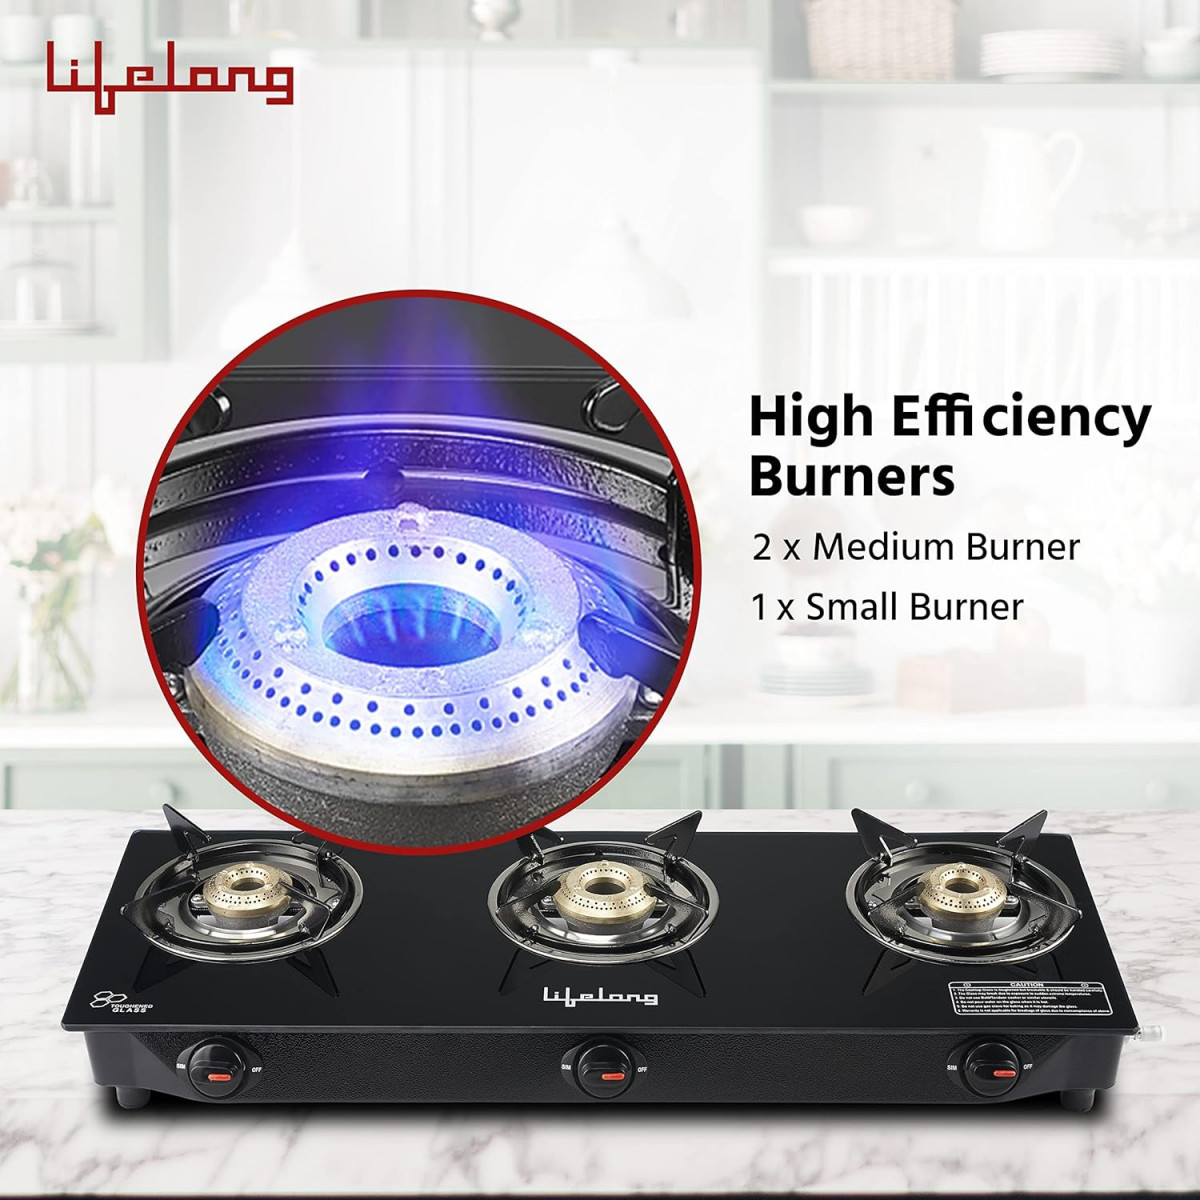 Lifelong LLGS930 Manual Ignition High Efficiency 3 Burner Gas Stove with Toughened Glass Top ISI Certified For LPG Use 1 Year Warranty Doorstep Service Black